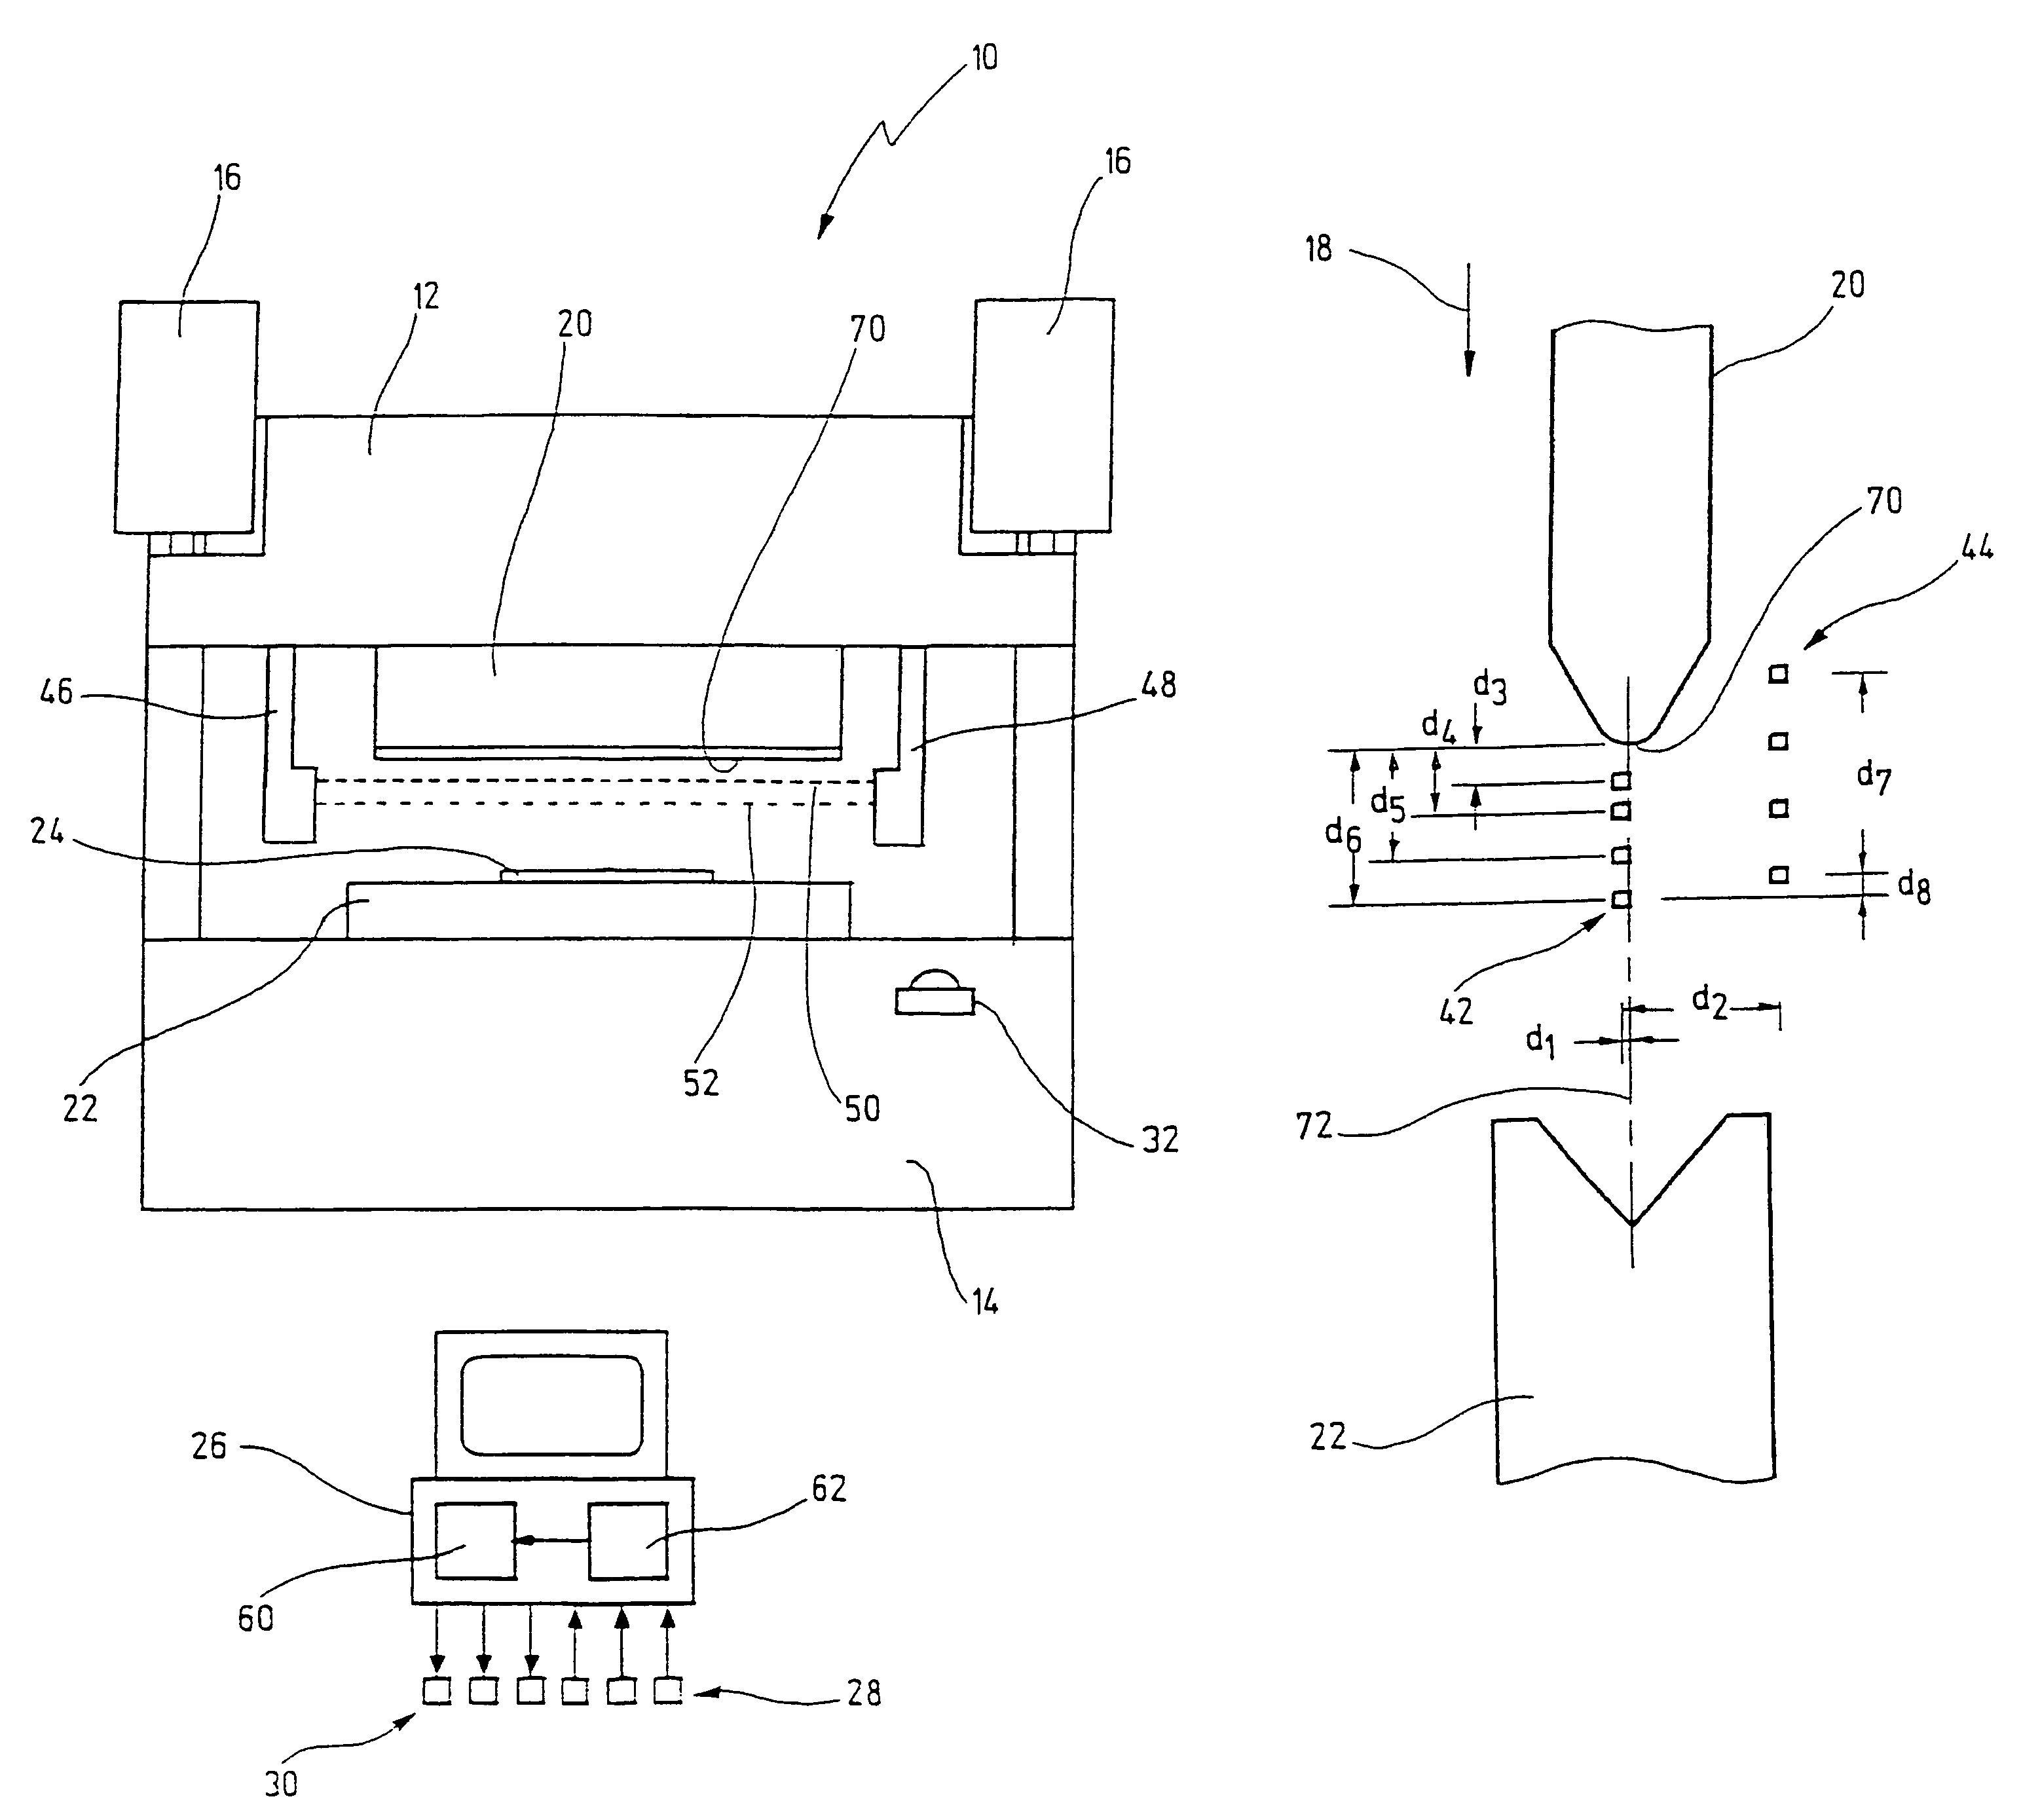 Safety apparatus for a machine, in particular for a press brake